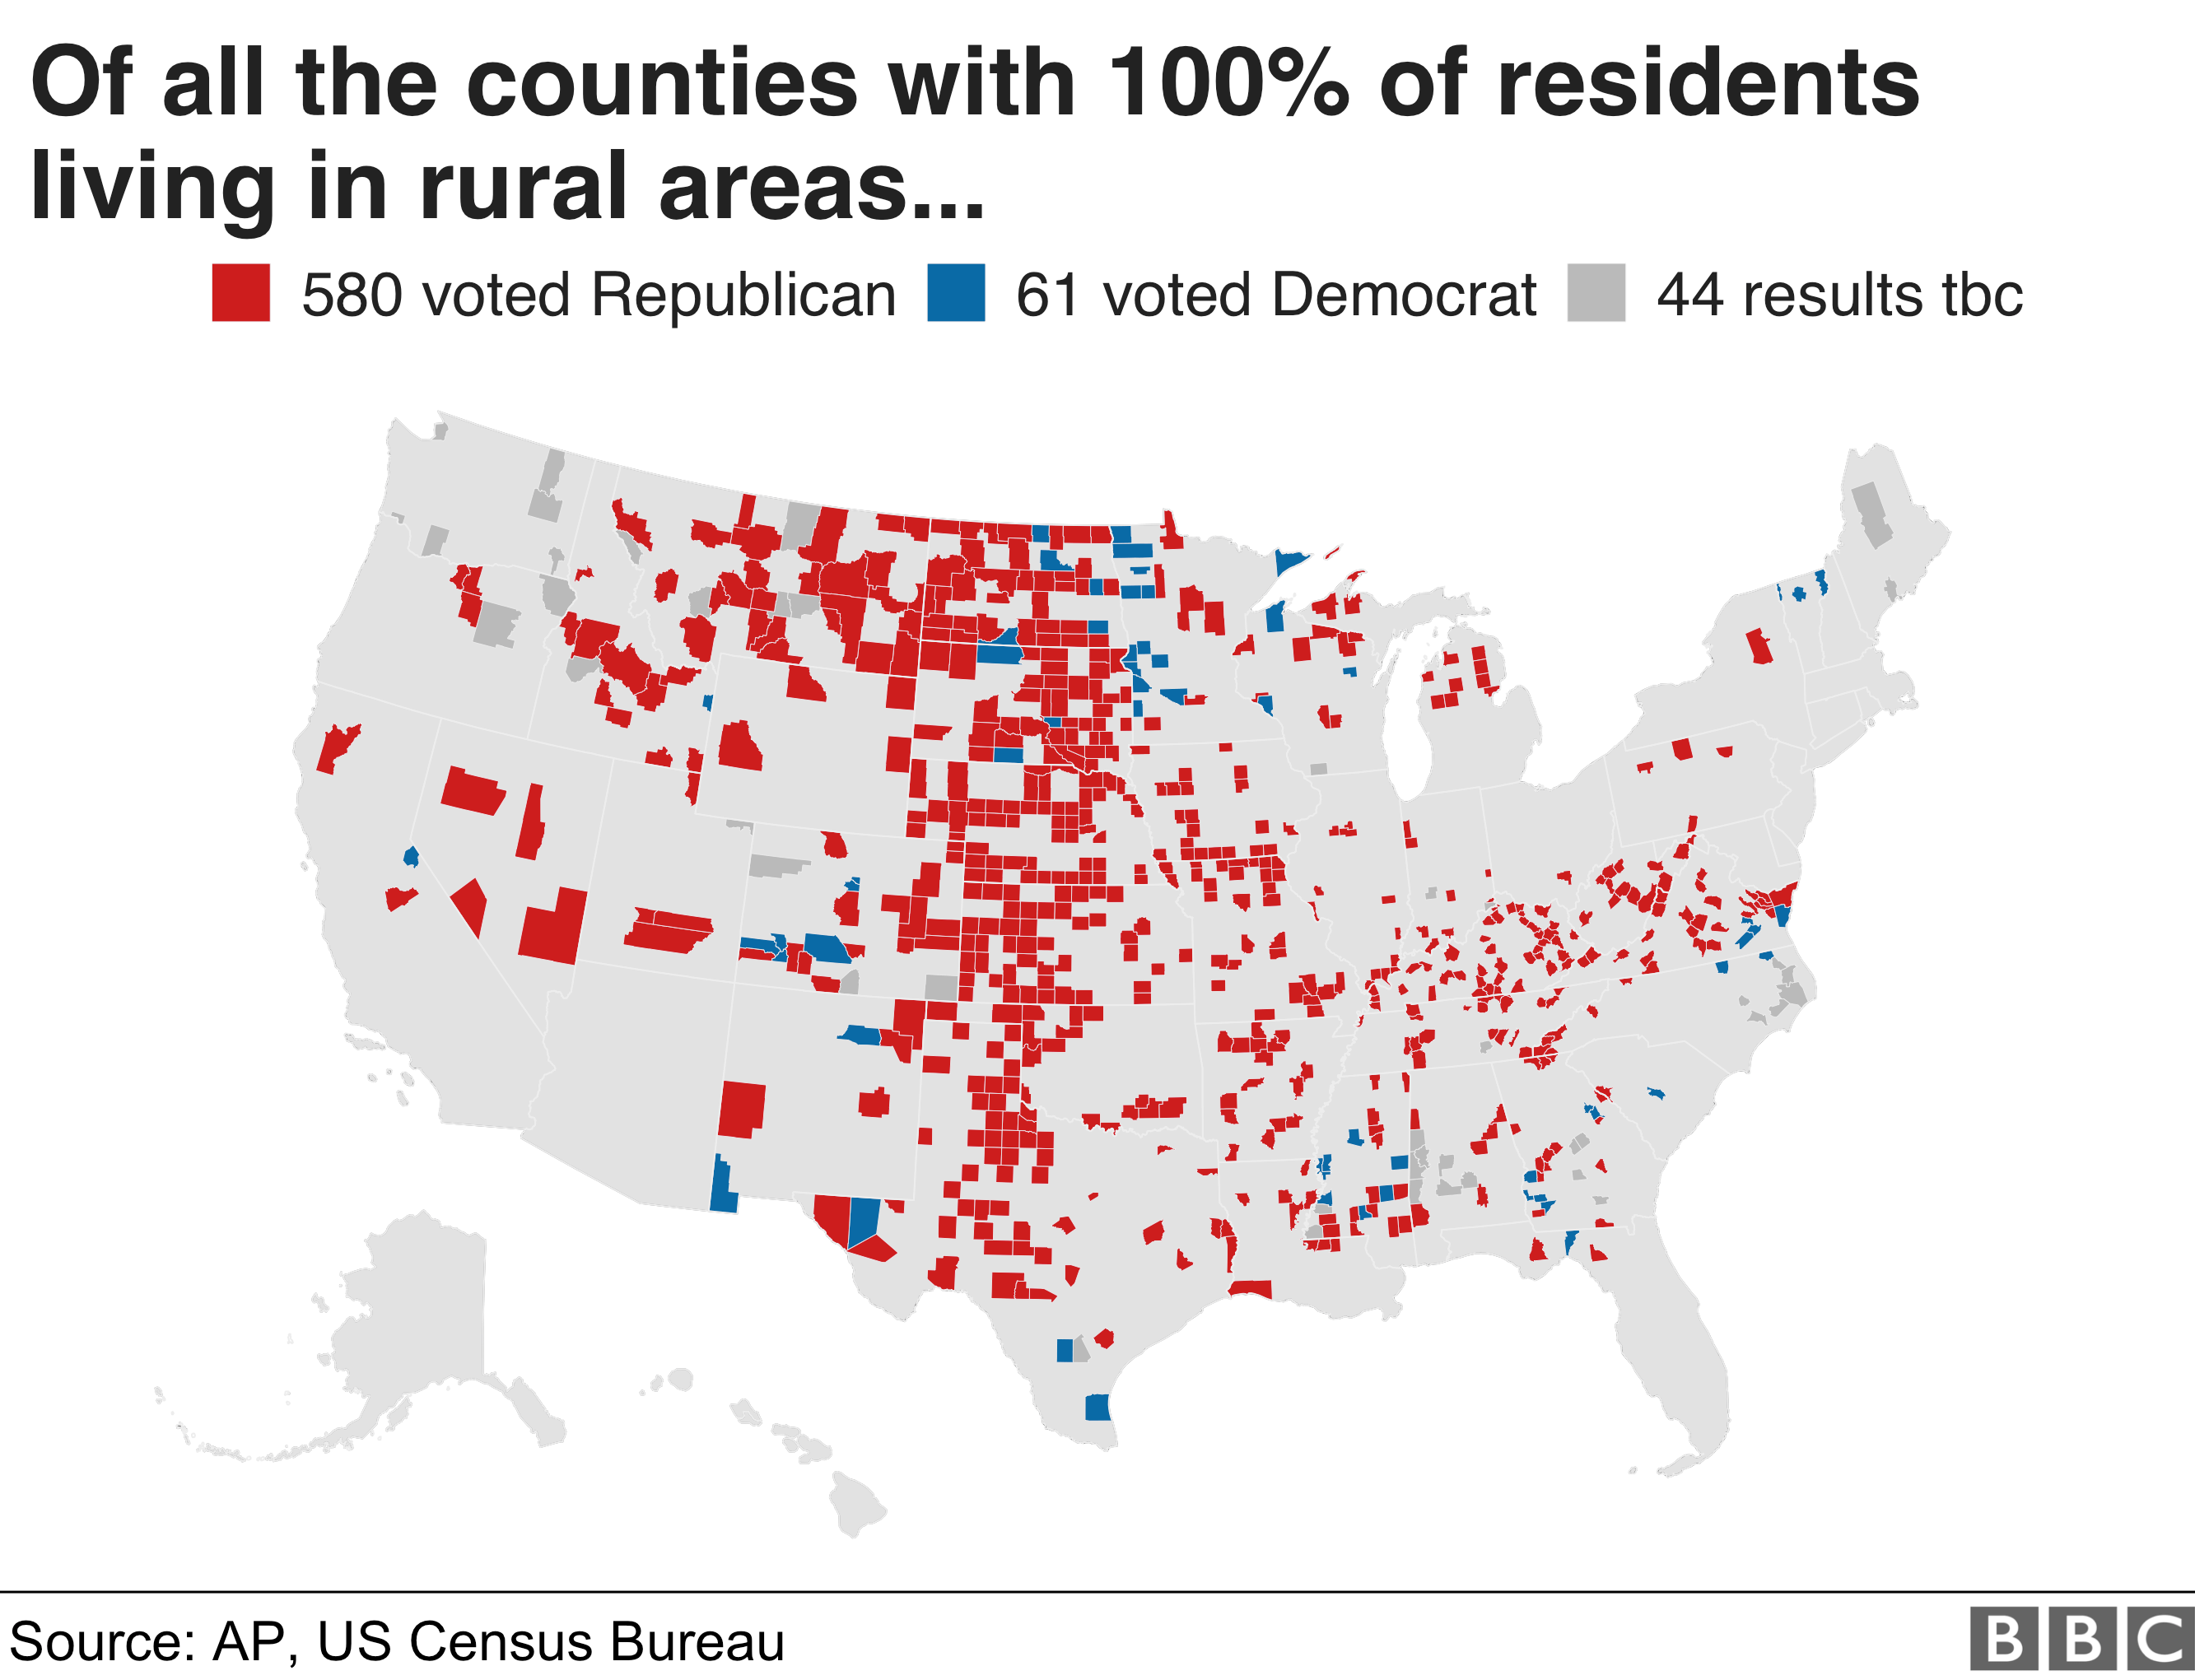 map of us counties by political party Us Mid Term Election Results 2018 Maps Charts And Analysis Bbc map of us counties by political party